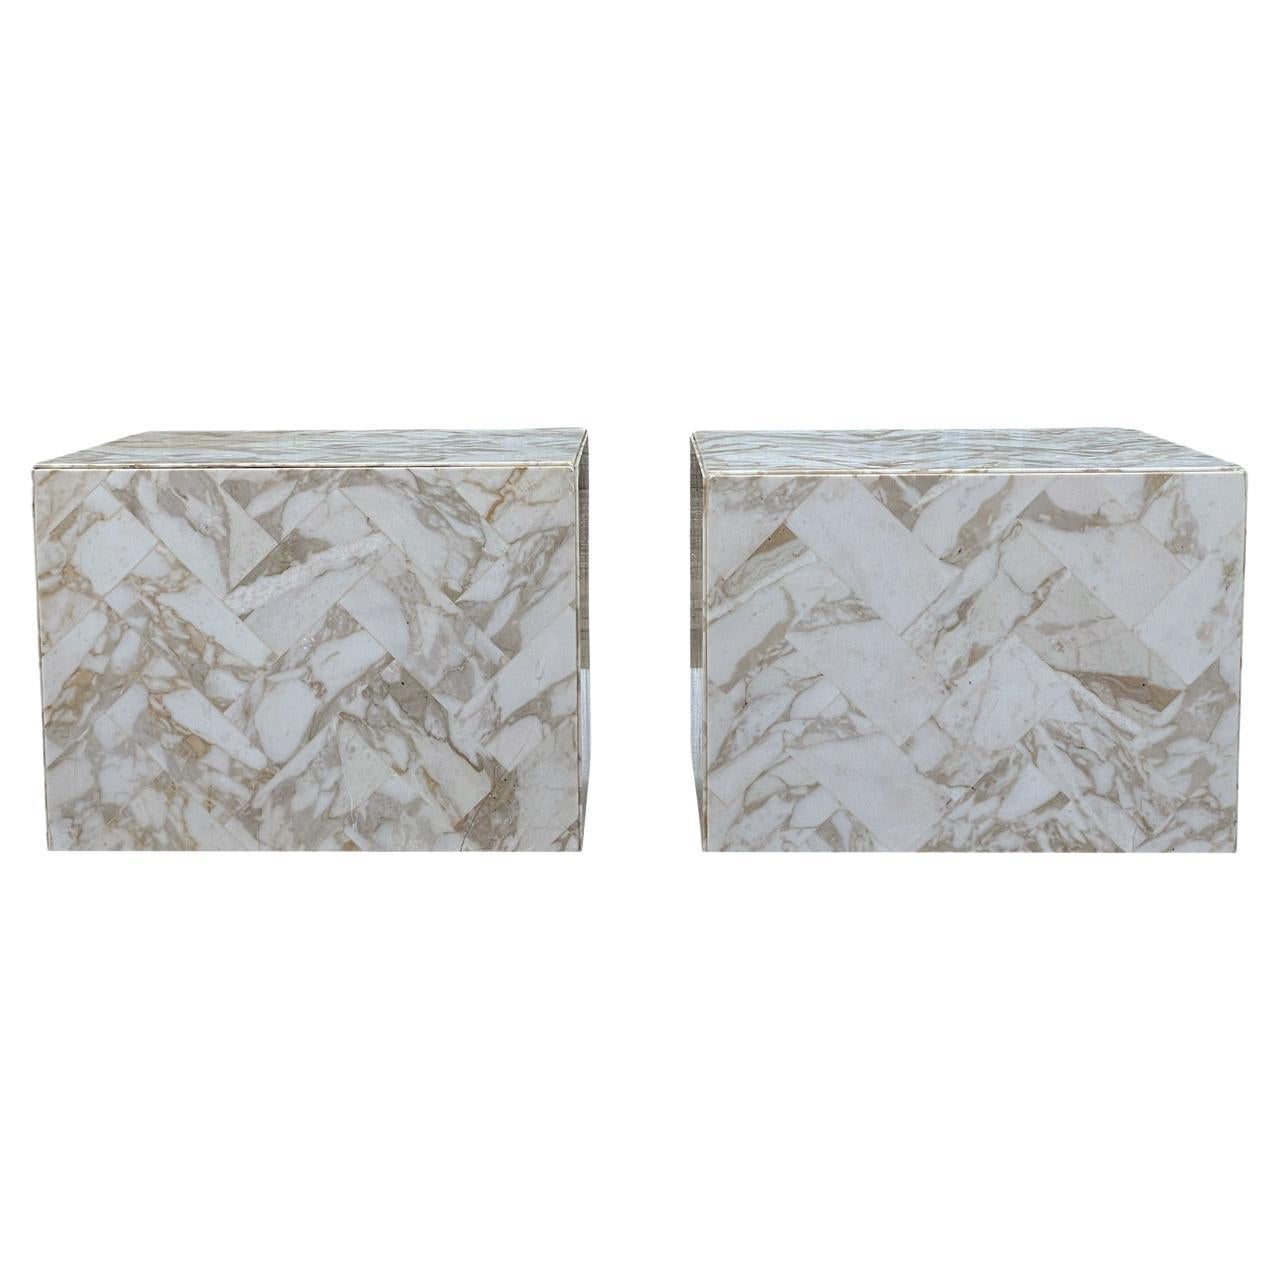 Pair Mid Century Italian Post Modern Marble Side Tables or End Tables on Casters For Sale